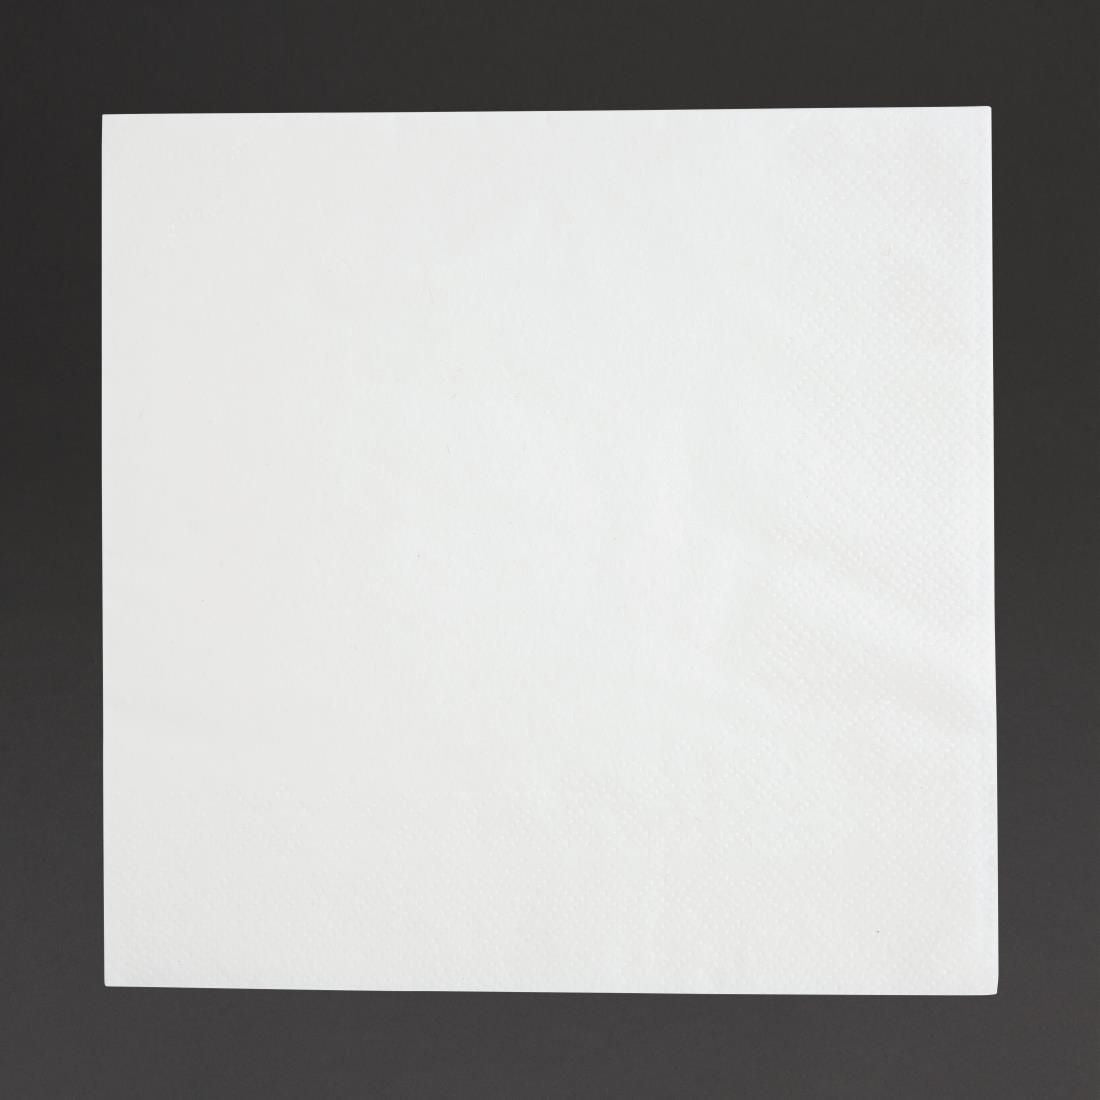 Fiesta Napkins White 300x300mm (Pack of 5000) JD Catering Equipment Solutions Ltd